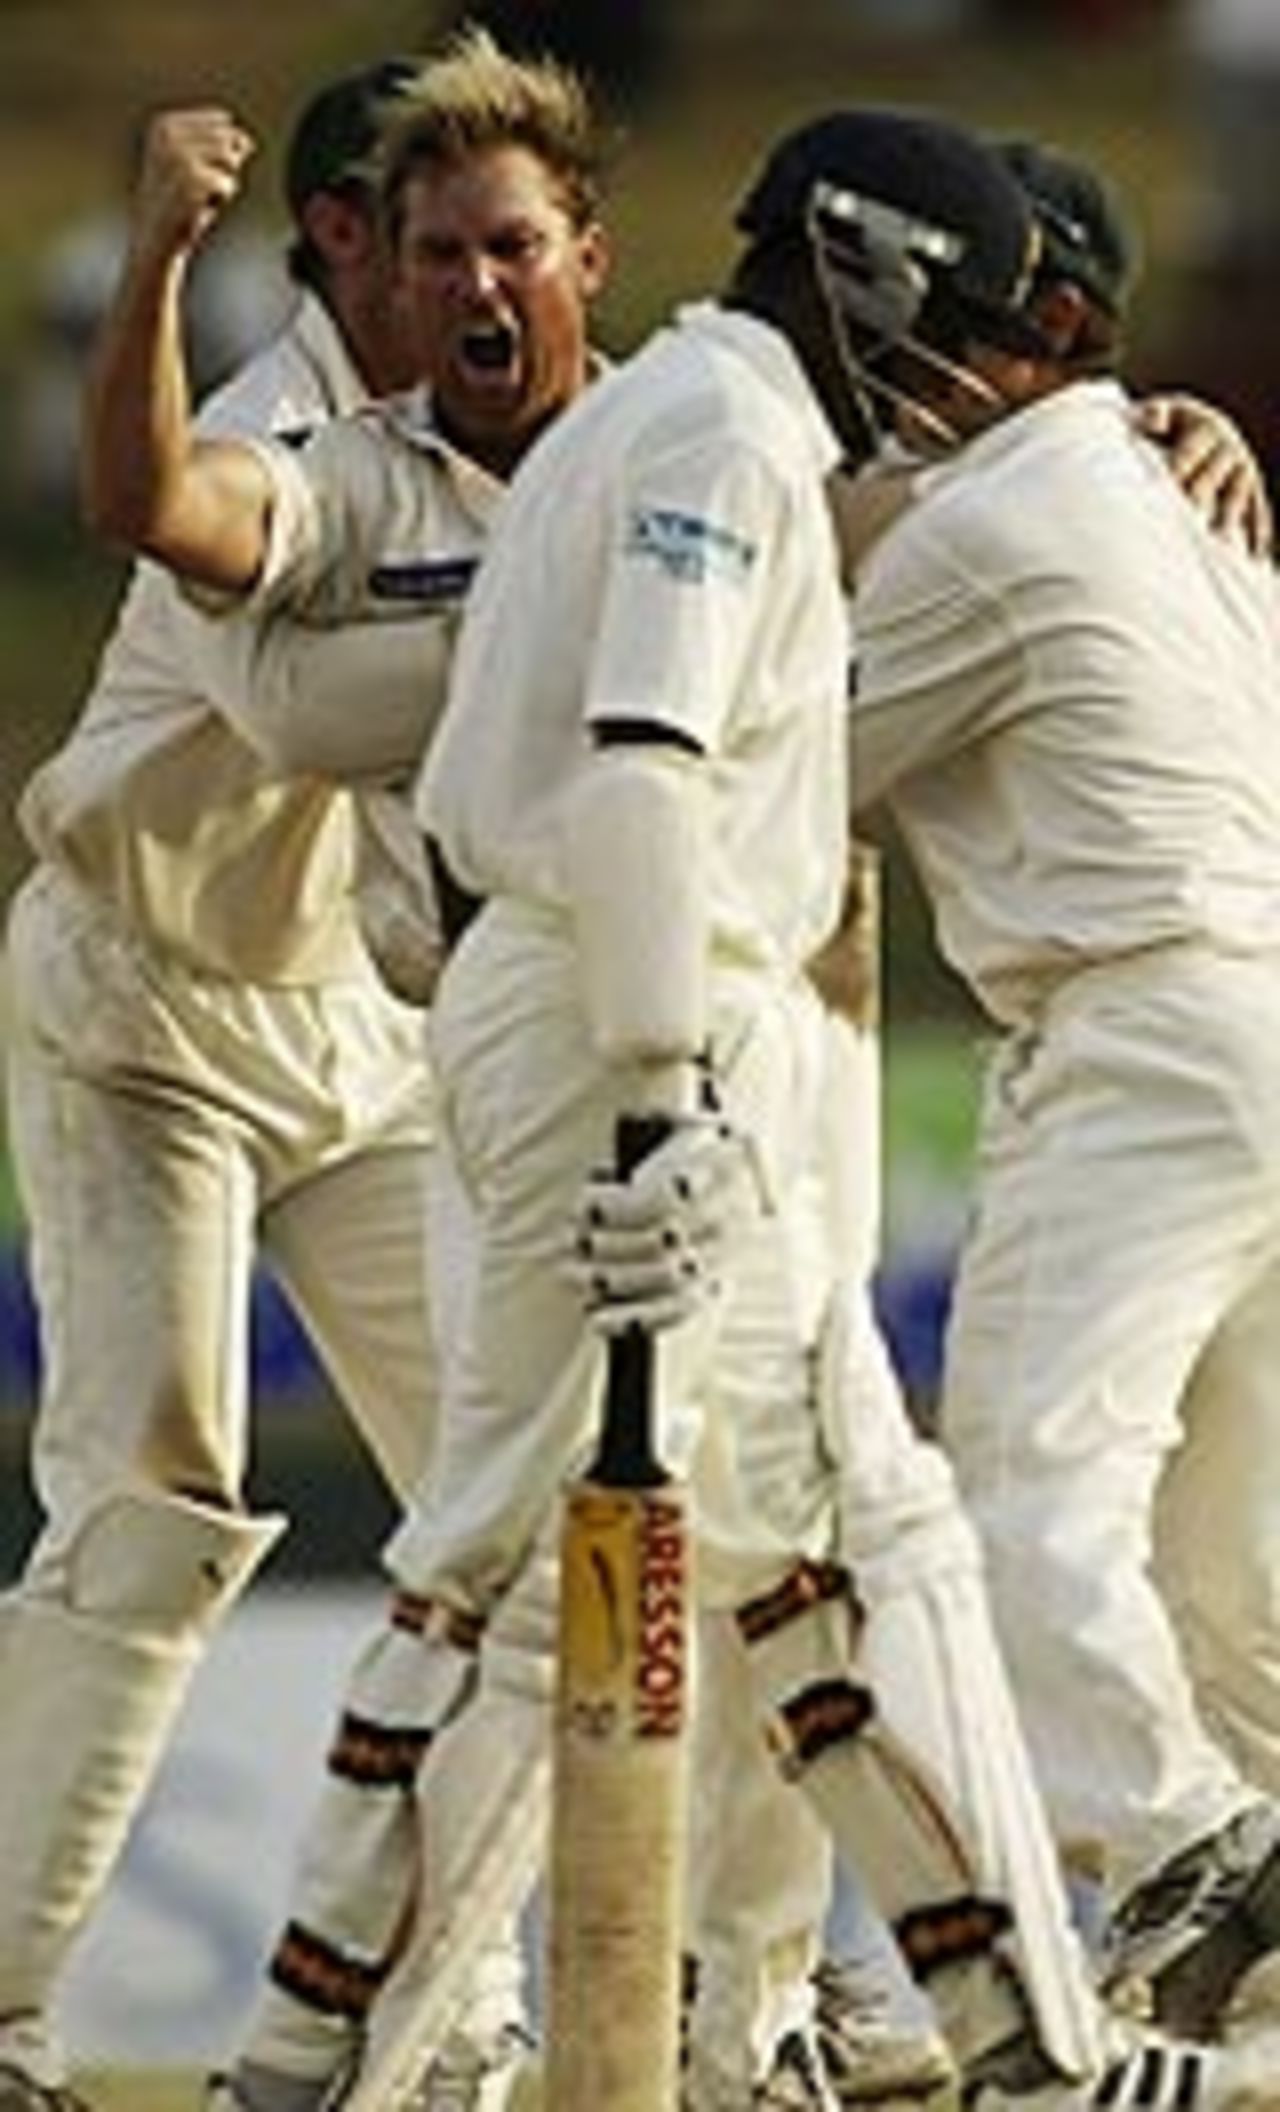 Shane Warne pumps his fist after a wicket, Sri Lanka v Australia, 3rd Test, Colombo, 5th day, March 28, 2004